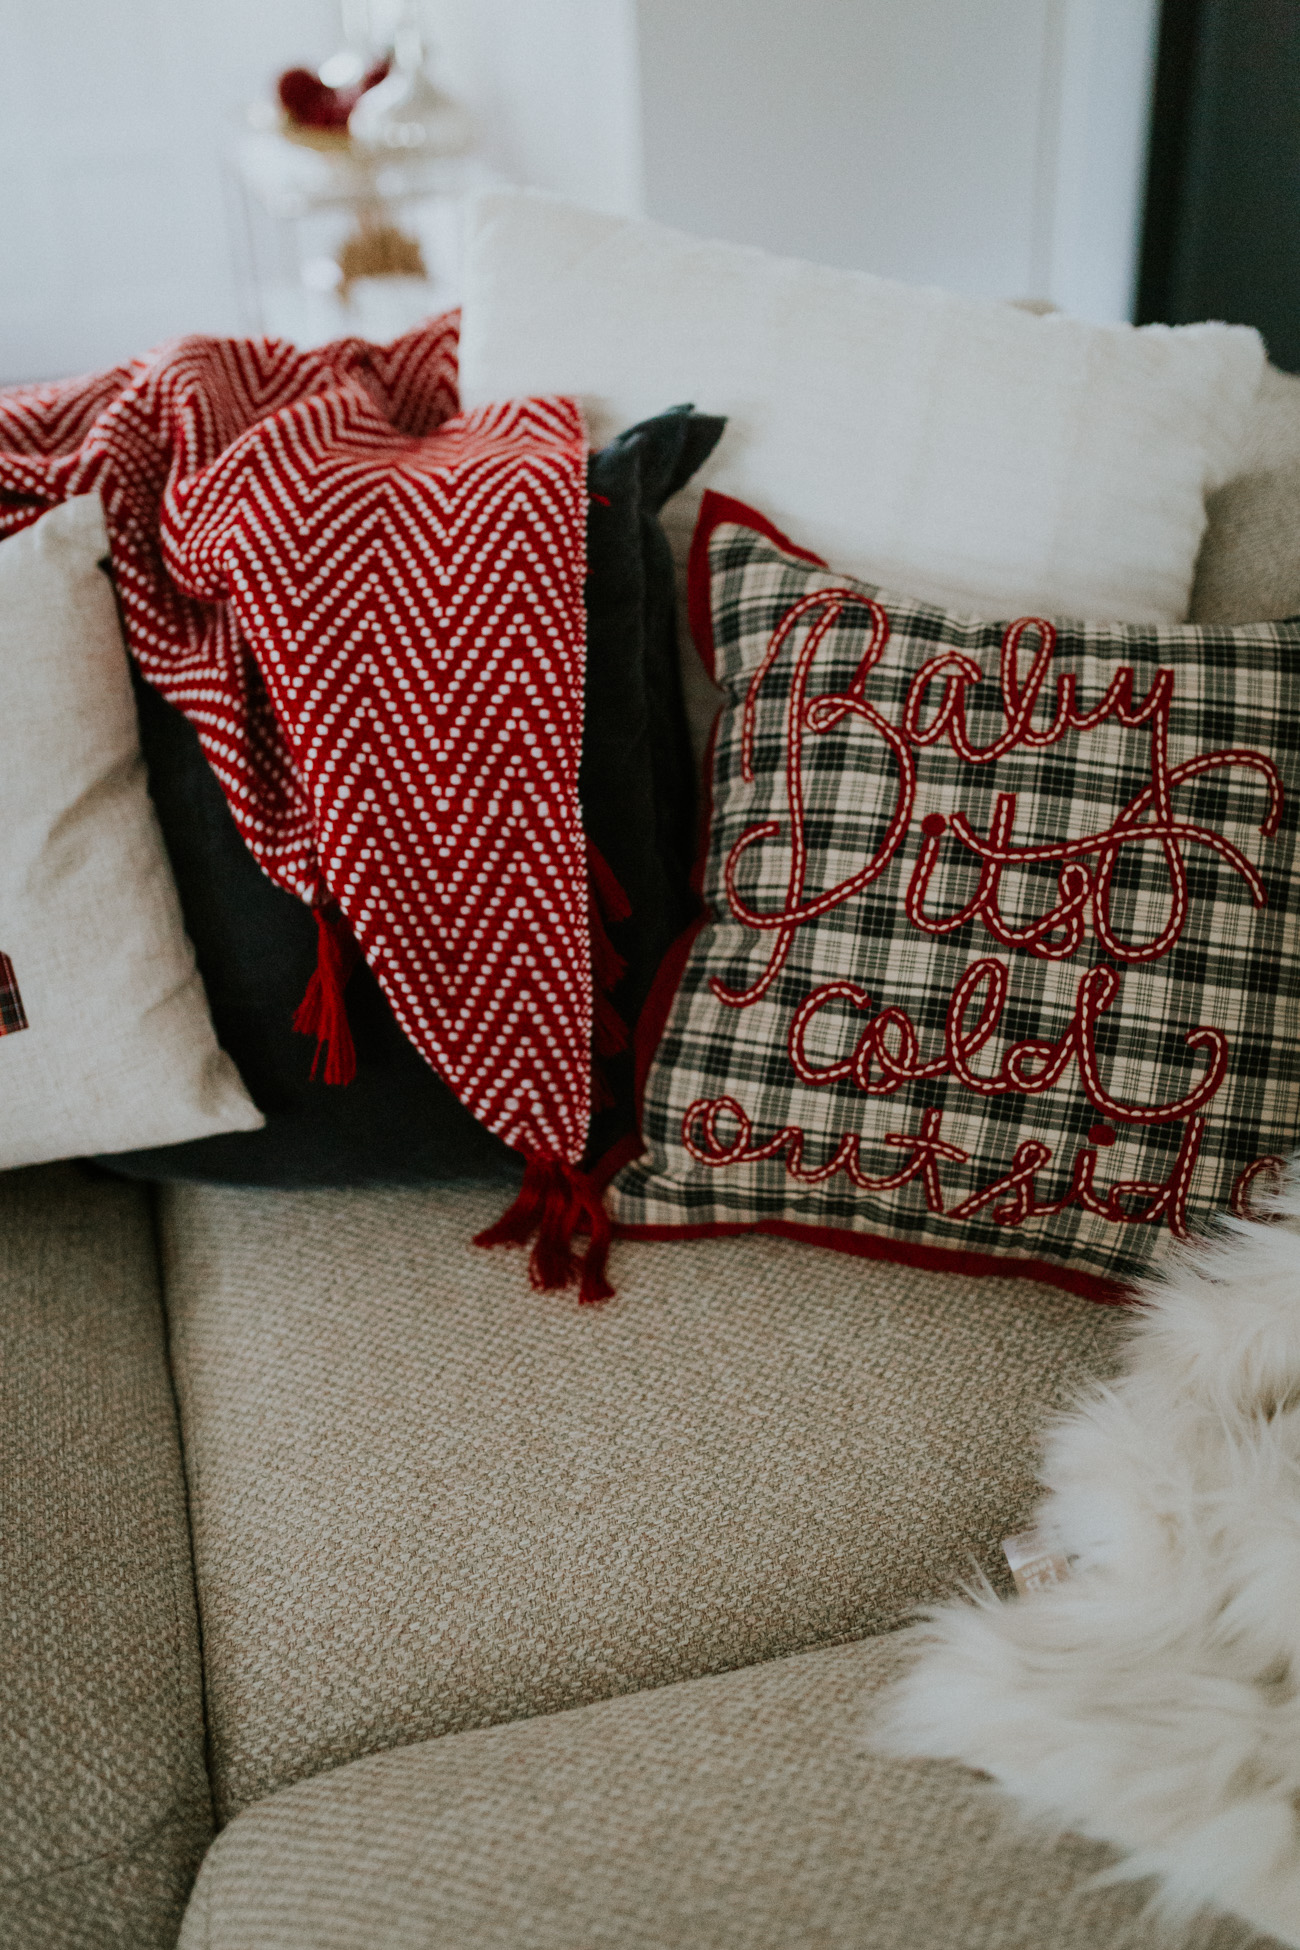 holiday home decor, holiday decorations, holiday decor ideas, nordstrom holiday decor, voluspa candles, holiday pillows, christmas throw blanket, faux fur pillow, faux fur throws, christmas tree decor, a southern drawl christmas tree, a southern drawl home // grace wainwright a southern drawl